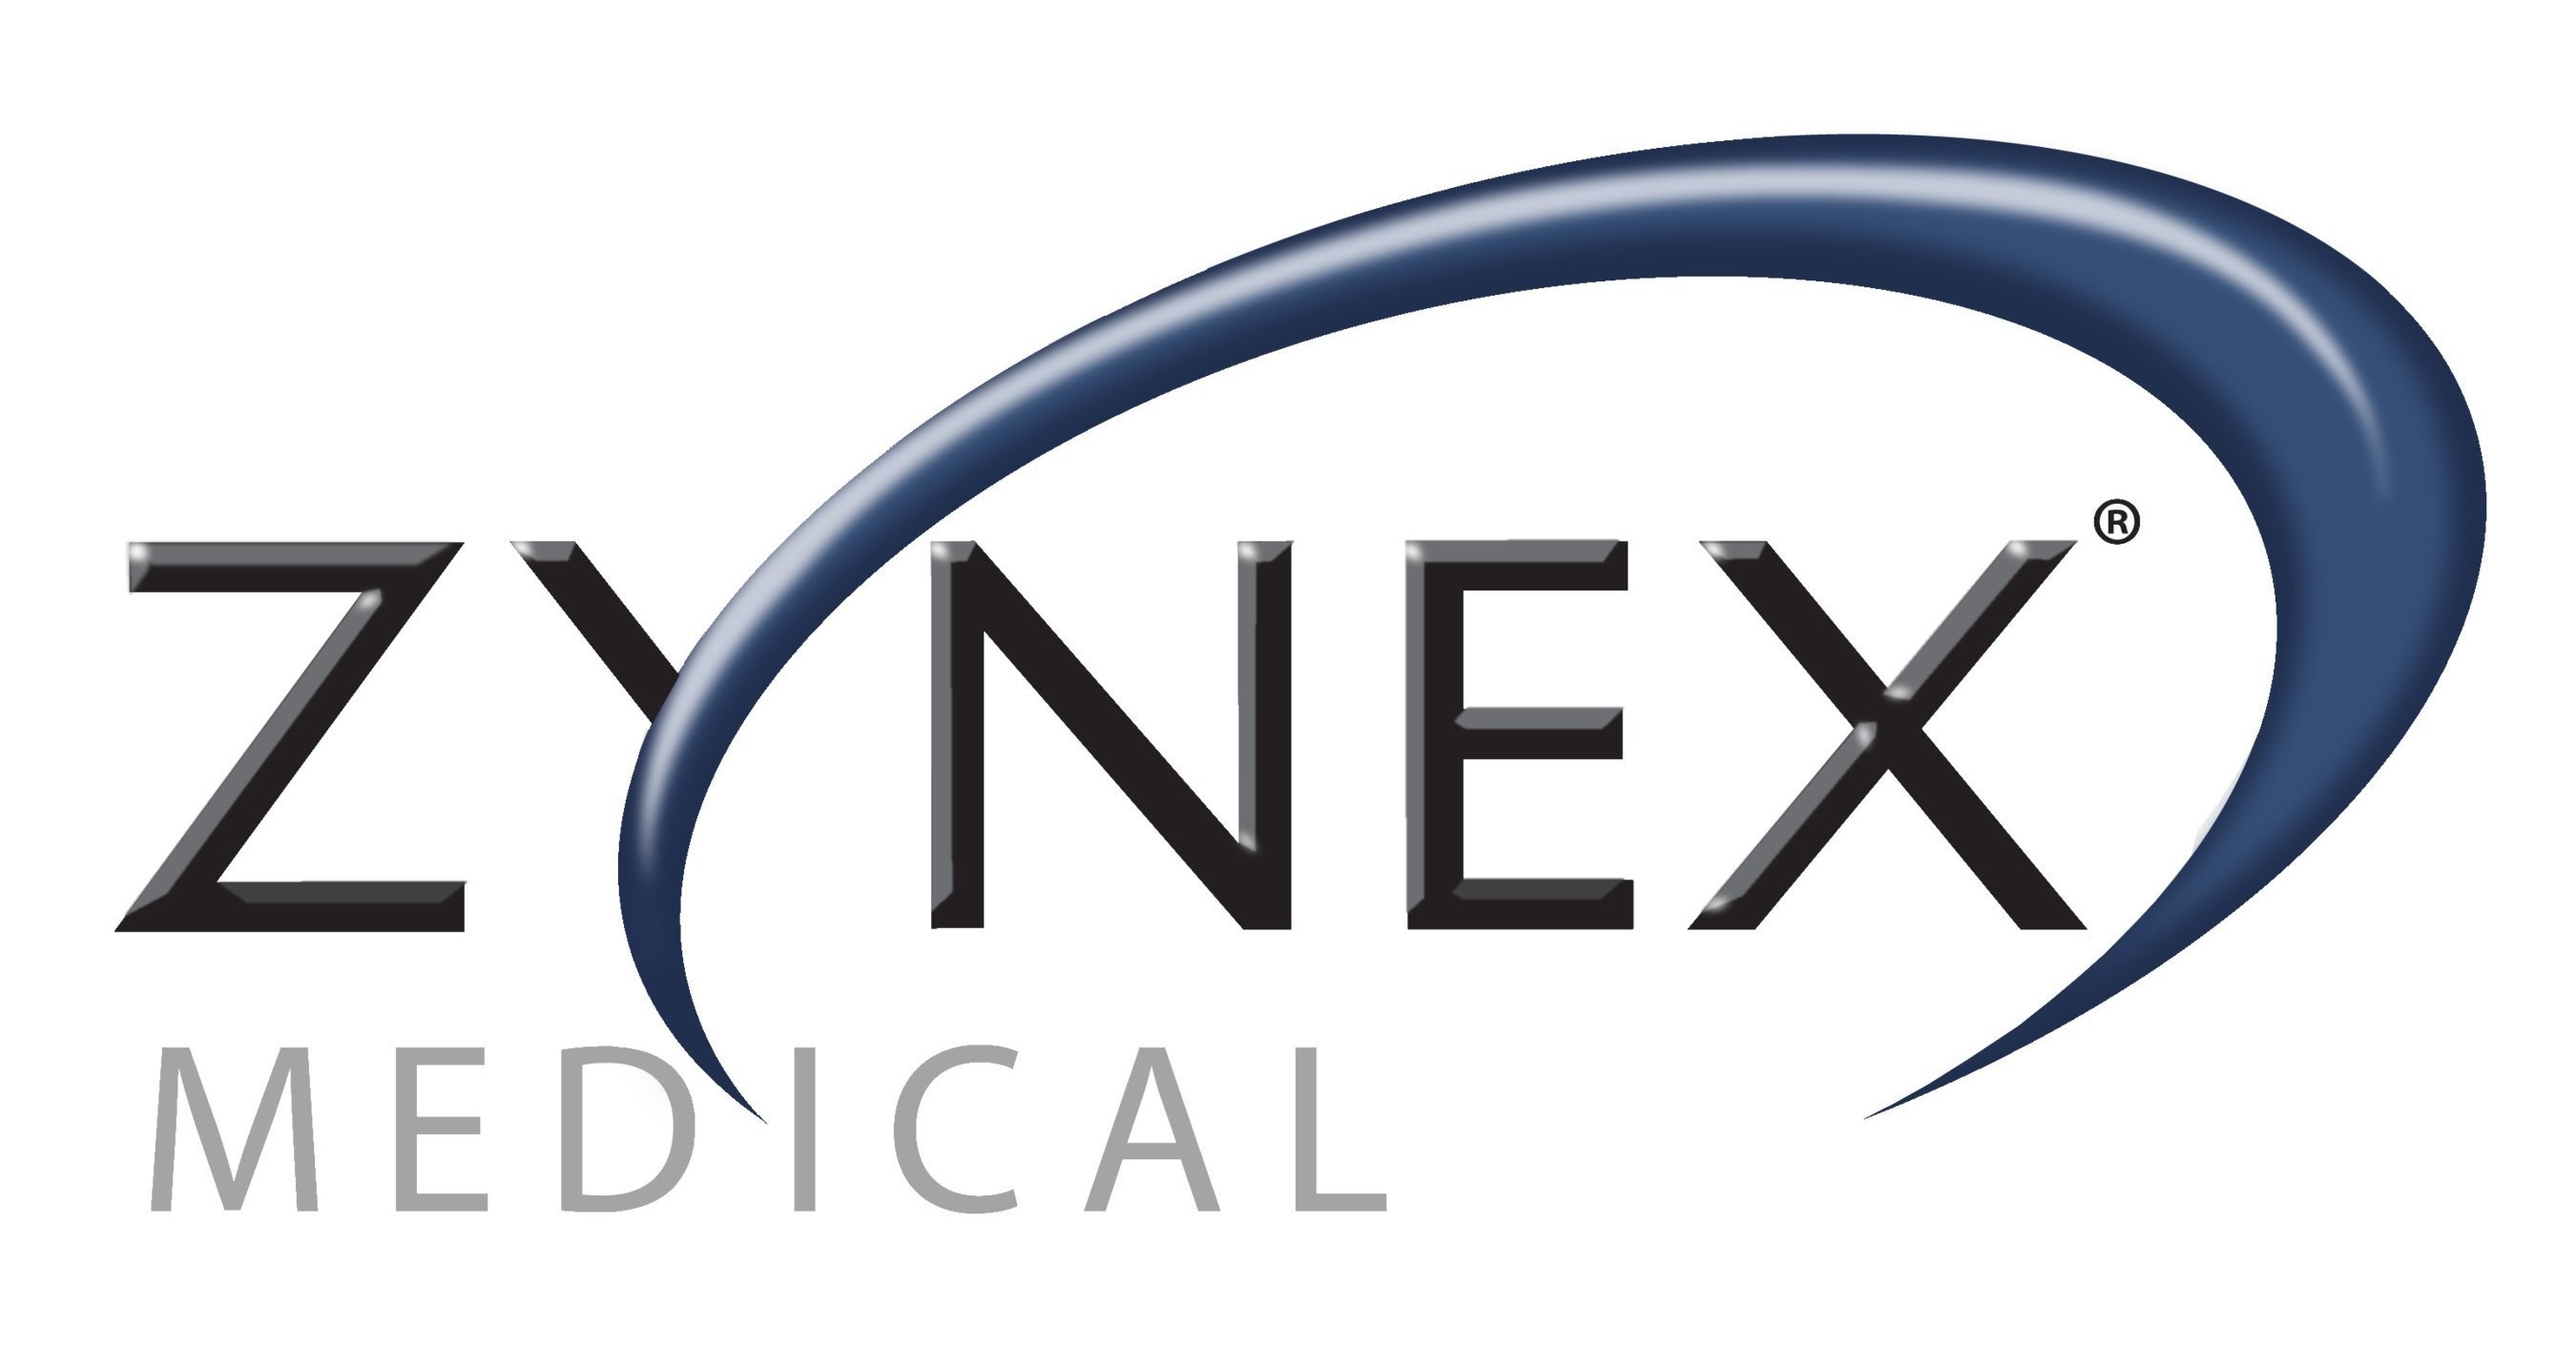 Top 25 Medical Technology Executives at Zynex Acknowledged